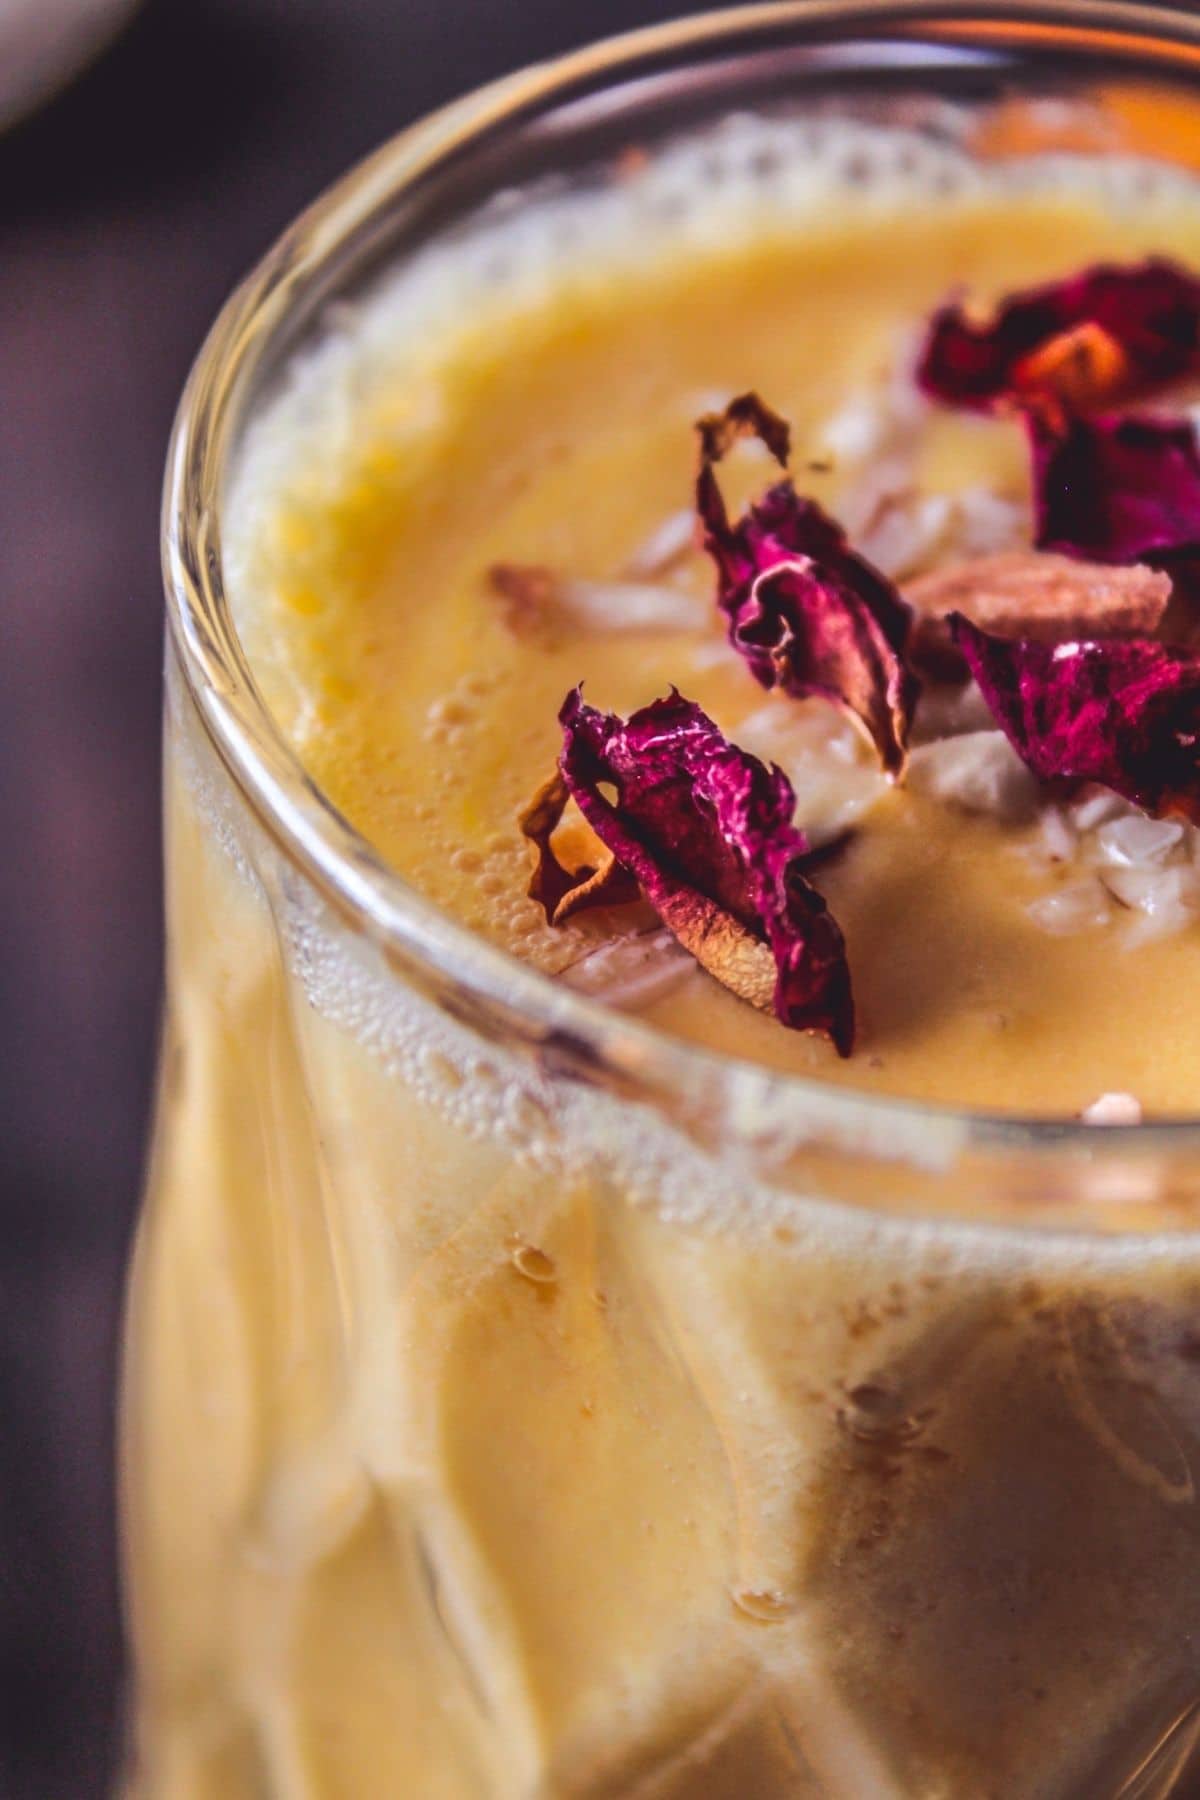 Crinkle glass with mango lassi and rose petals on top